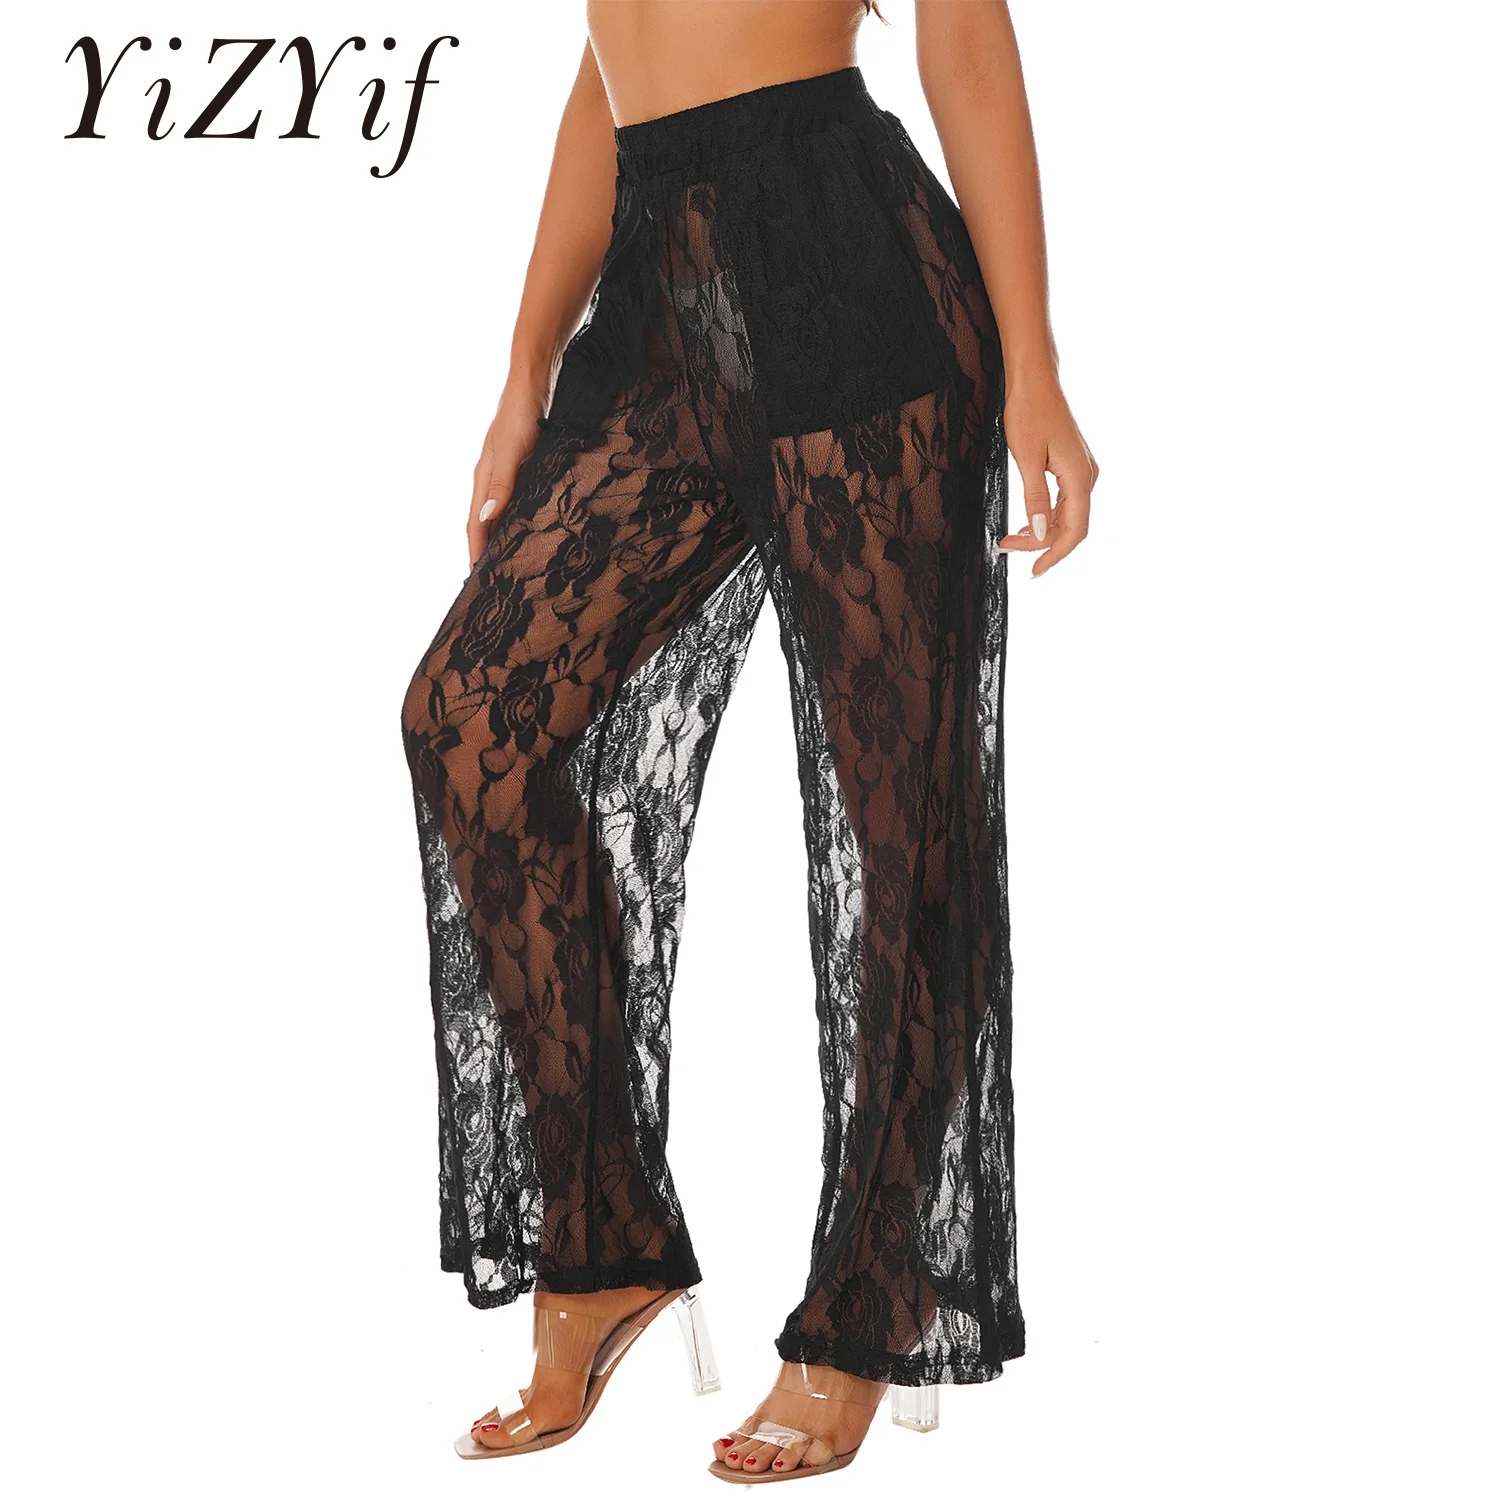 Sexy Women See-Through Wide Leg Pants Beach Swimsuit Cover Ups Bottoms Lace Mesh Sheer High Waist Casual Trousers Party Clubwear